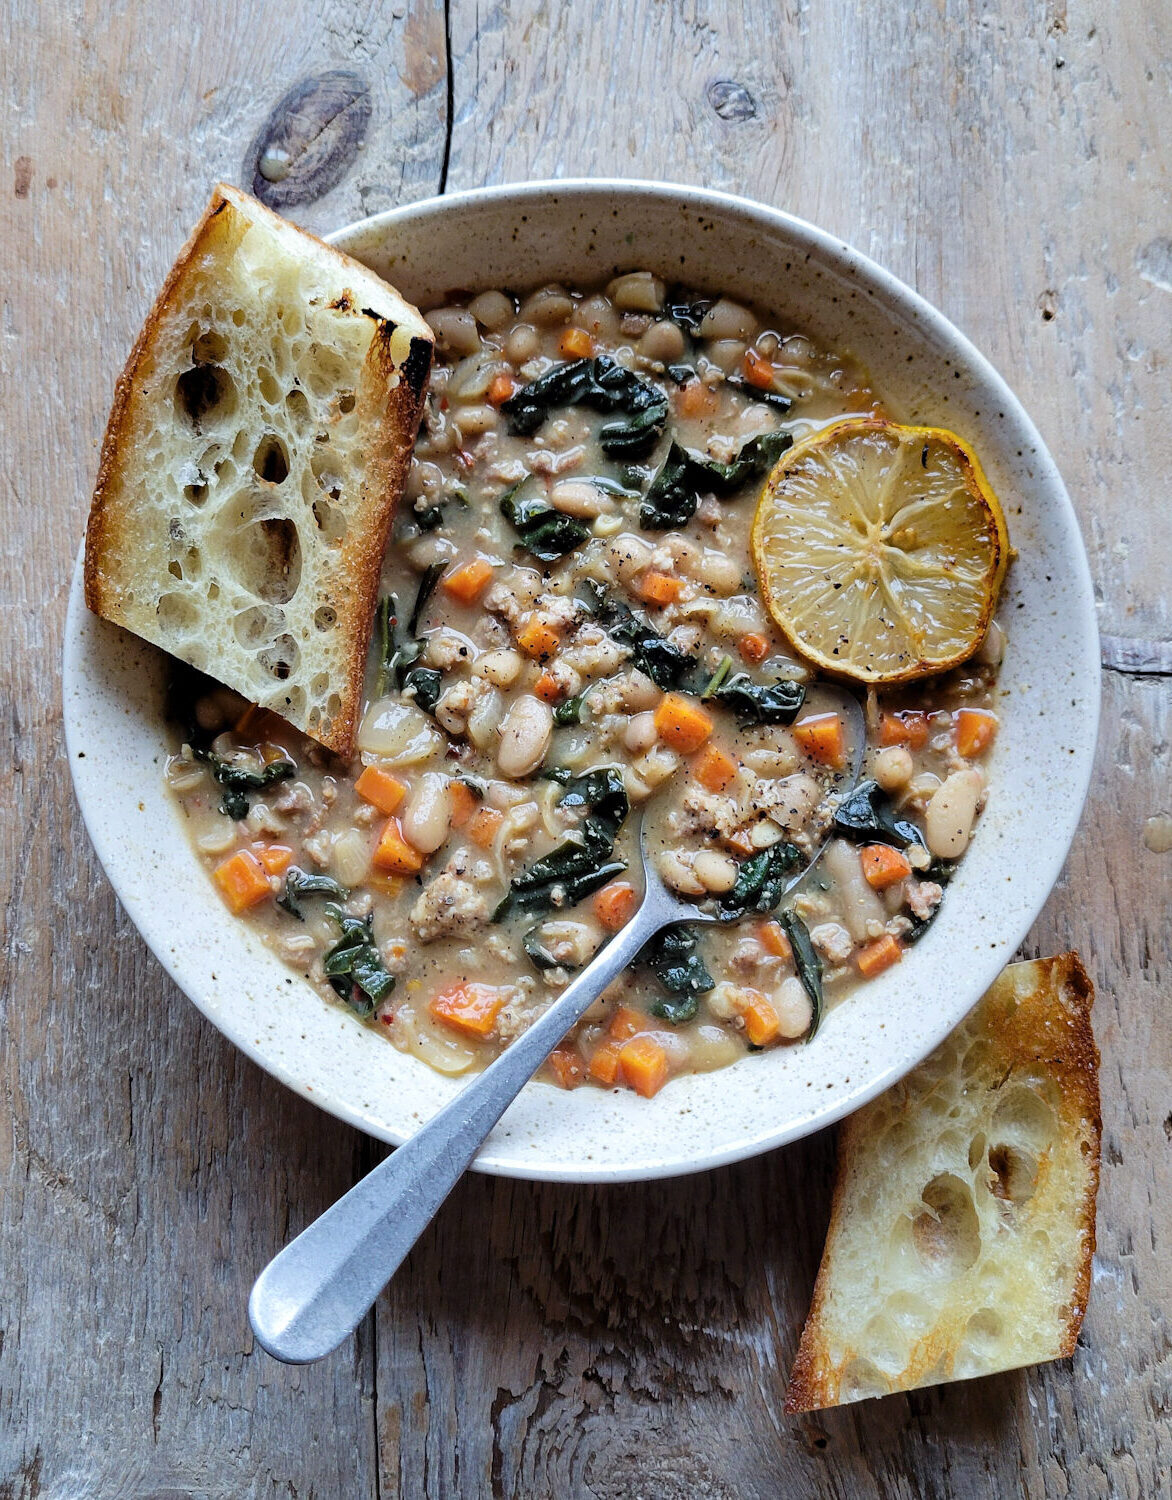 A bowl of Brothy Beans with Sausage and kale on the table, with toated baguette slices and lemon on the side.